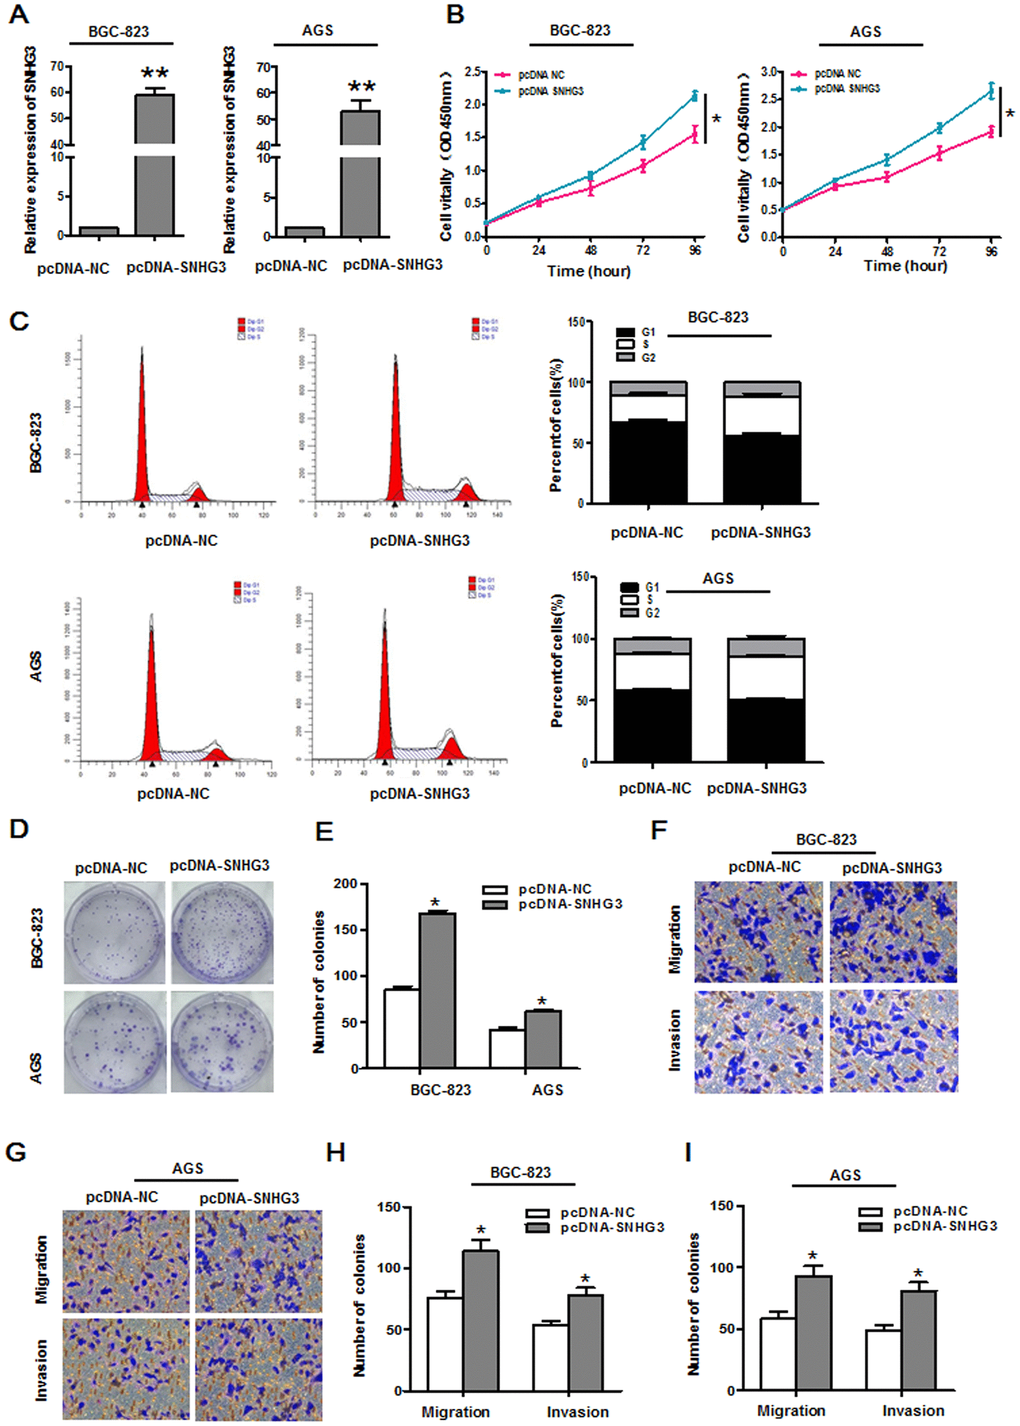 Overexpressing SNHG3 enhances gastric cancer cell growth and metastasis. (A) SNHG3 expression in BGC-823 and AGS cells was assessed following pcDNA3.1-SNHG3 transfection. *PB) Transfected cell proliferation was assessed via CCK-8 assay. *PC) Cell cycle progression in BGC-823 and AGS cells transfected with pcDNA3.1-SNHG3 was assessed via flow cytometry. (D, E) BGC-823 and AGS cell colony forming activity was assessed following SNHG3 overexpression. *PF–I) Transwell migration and invasion assays were used to assess BGC-823 and AGS cells following pcDNA3.1-SNHG3 transfection. *P